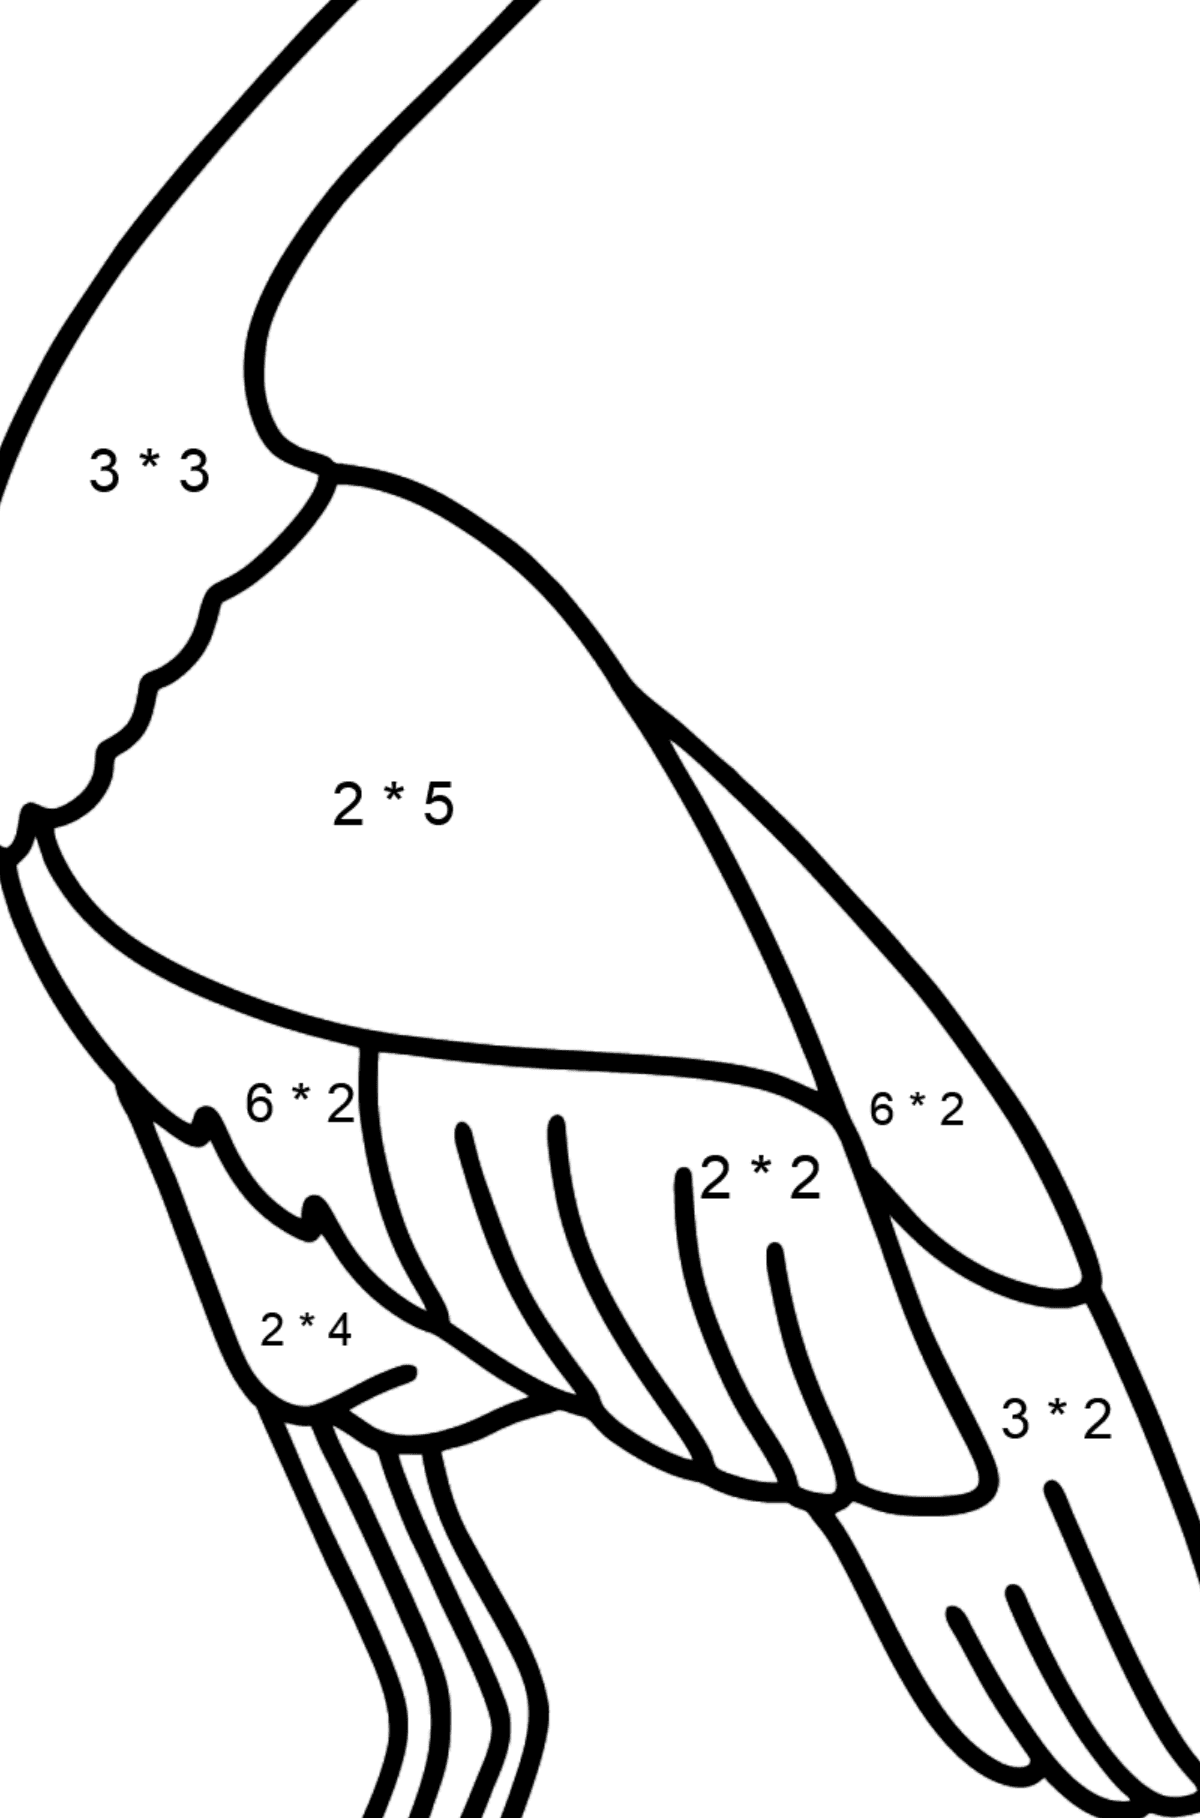 Stork coloring page - Math Coloring - Multiplication for Kids